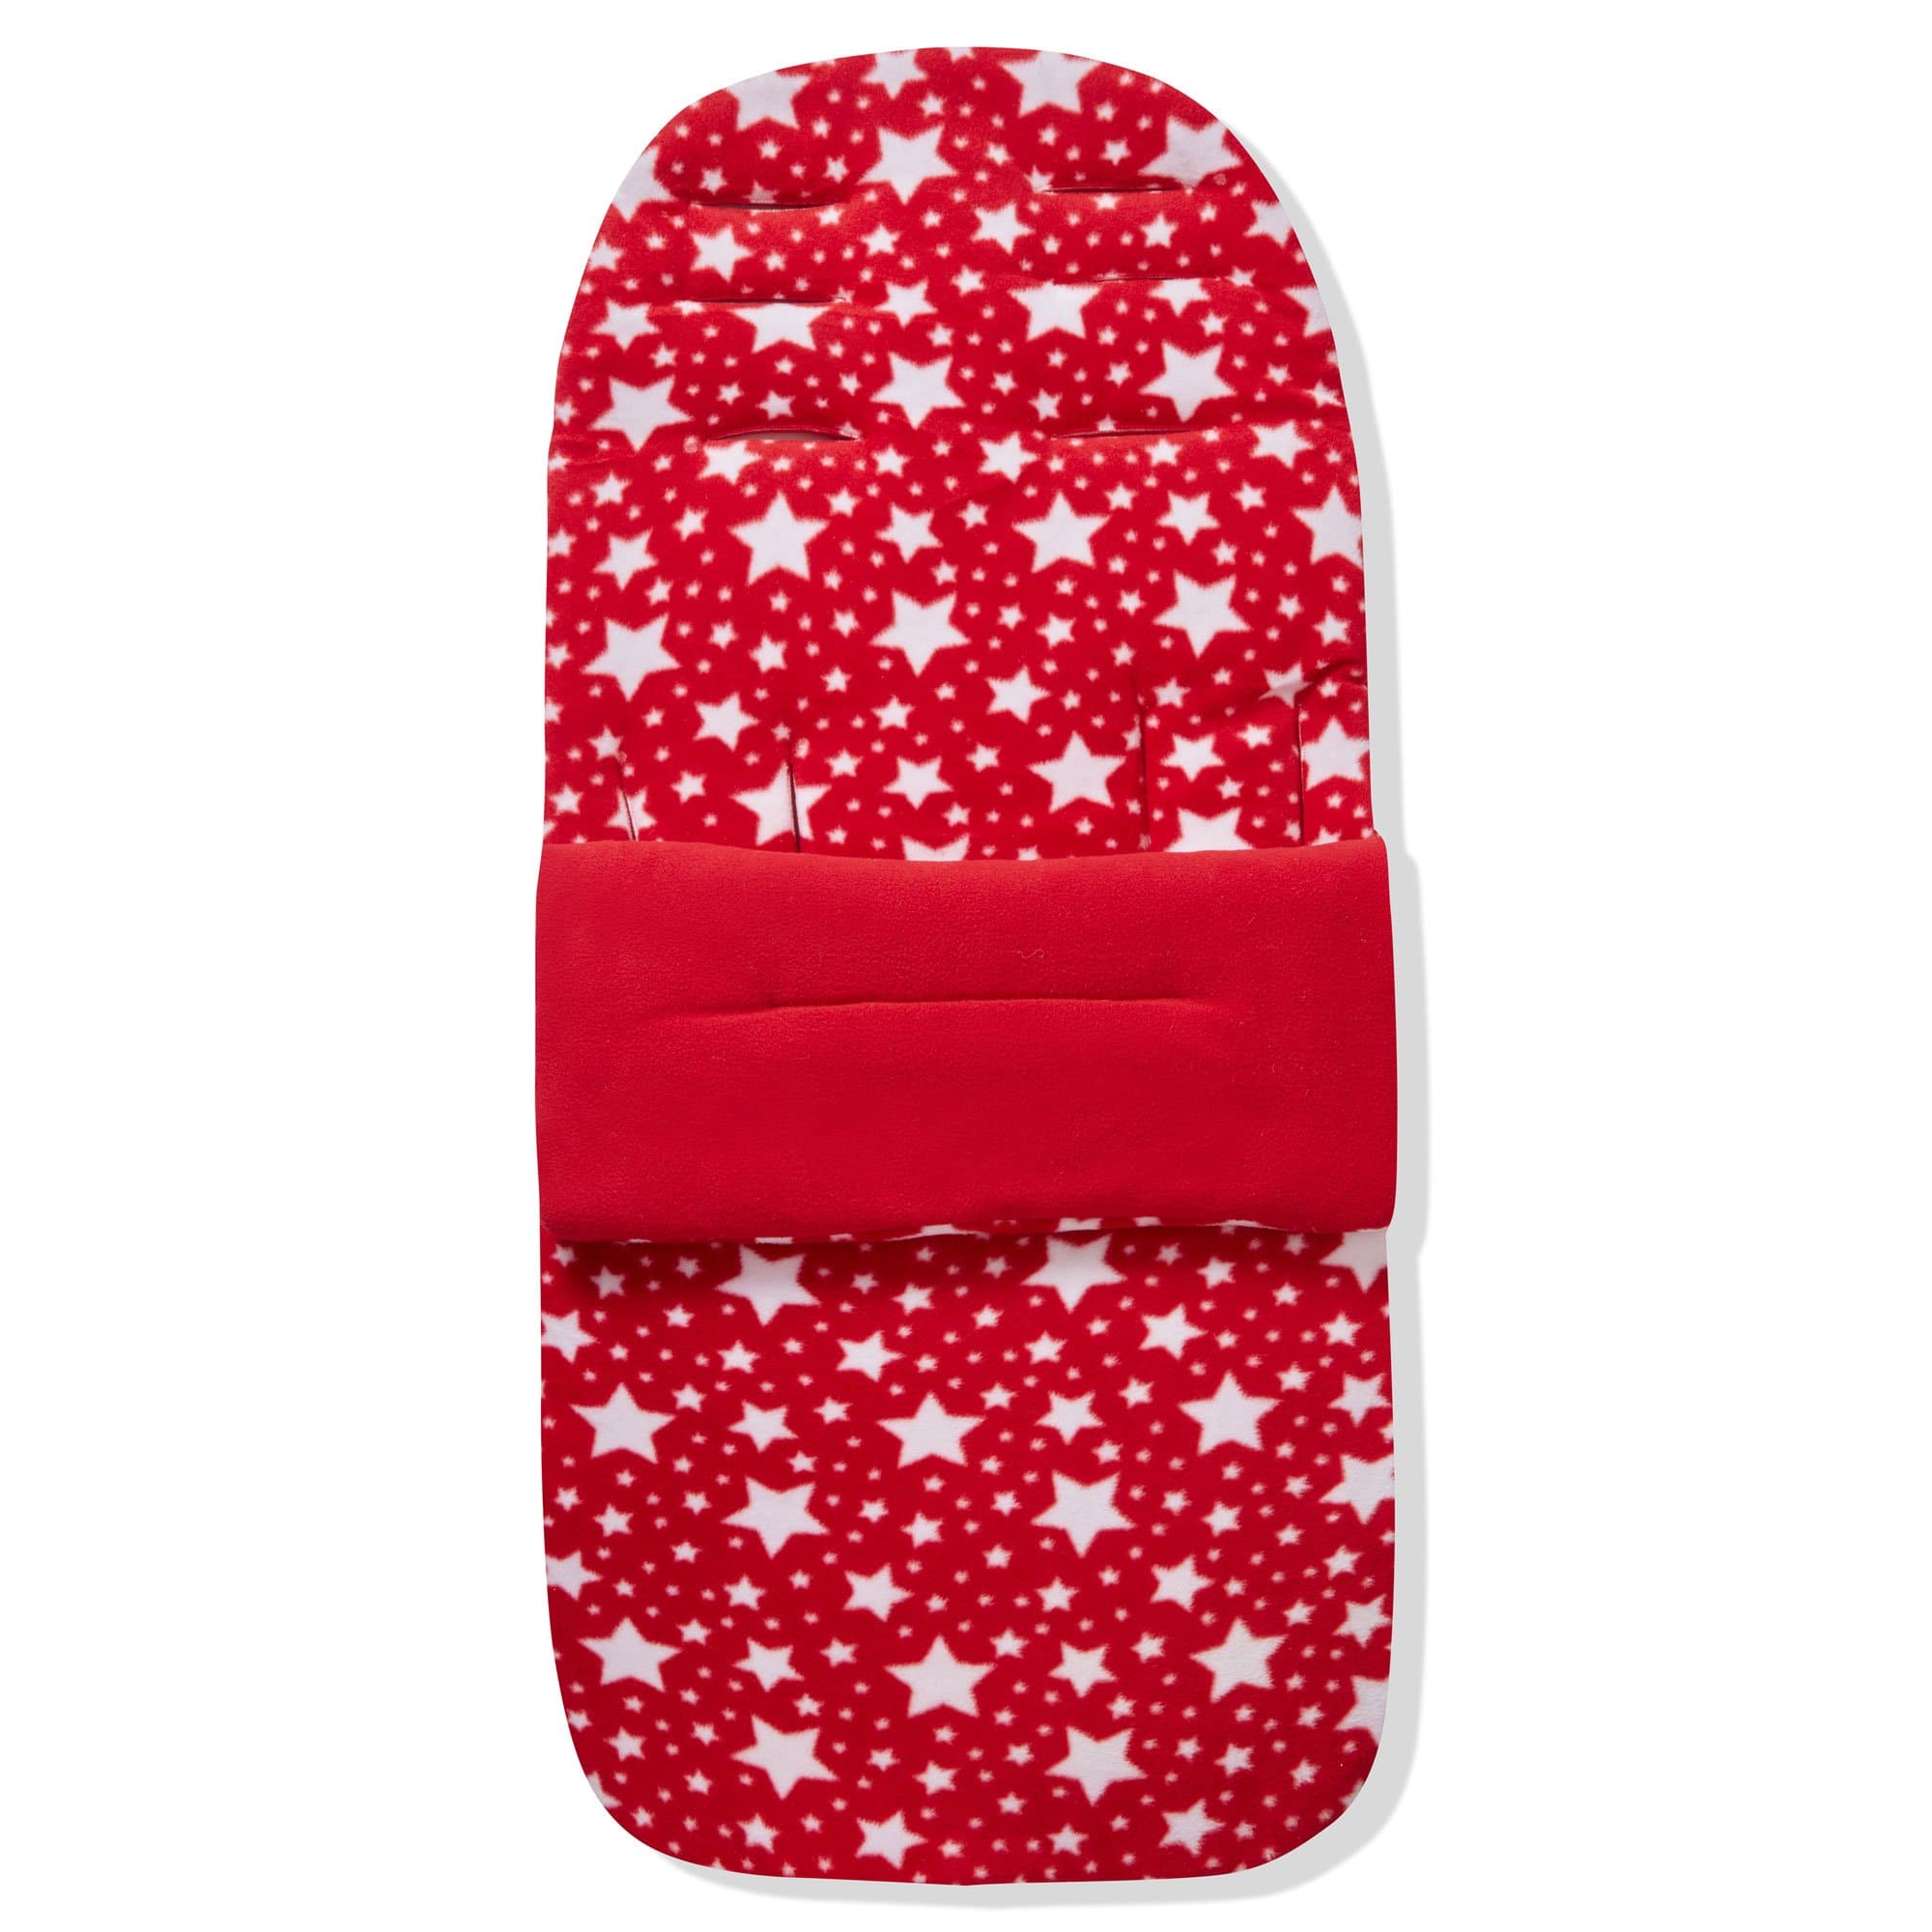 Fleece Footmuff / Cosy Toes Compatible with Peg Perego - For Your Little One